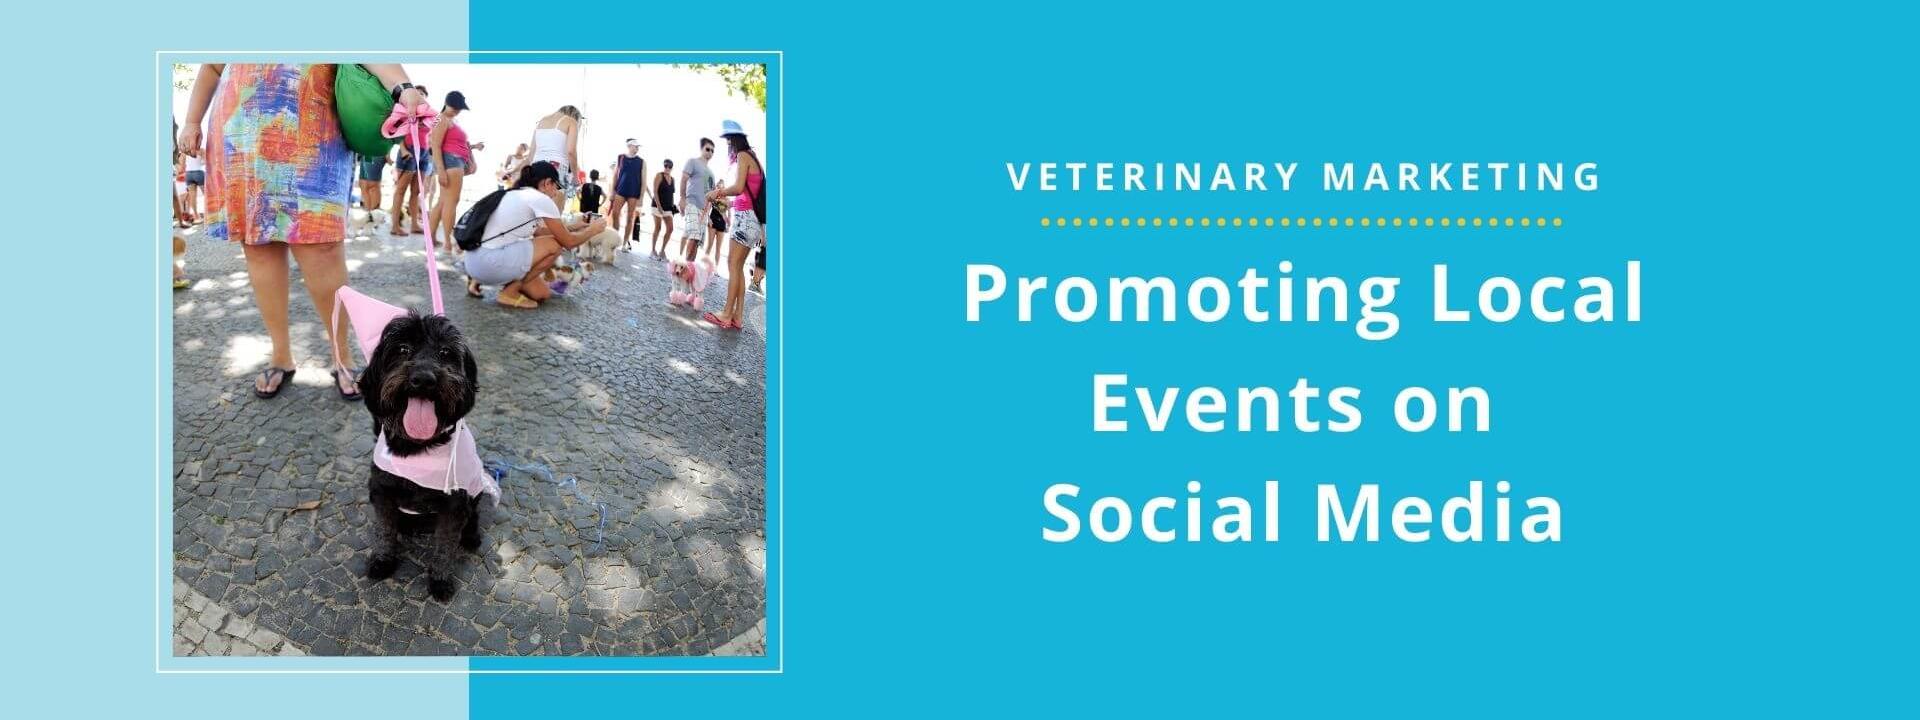 How Veterinary Practices Can Promote Local Events On Social Media